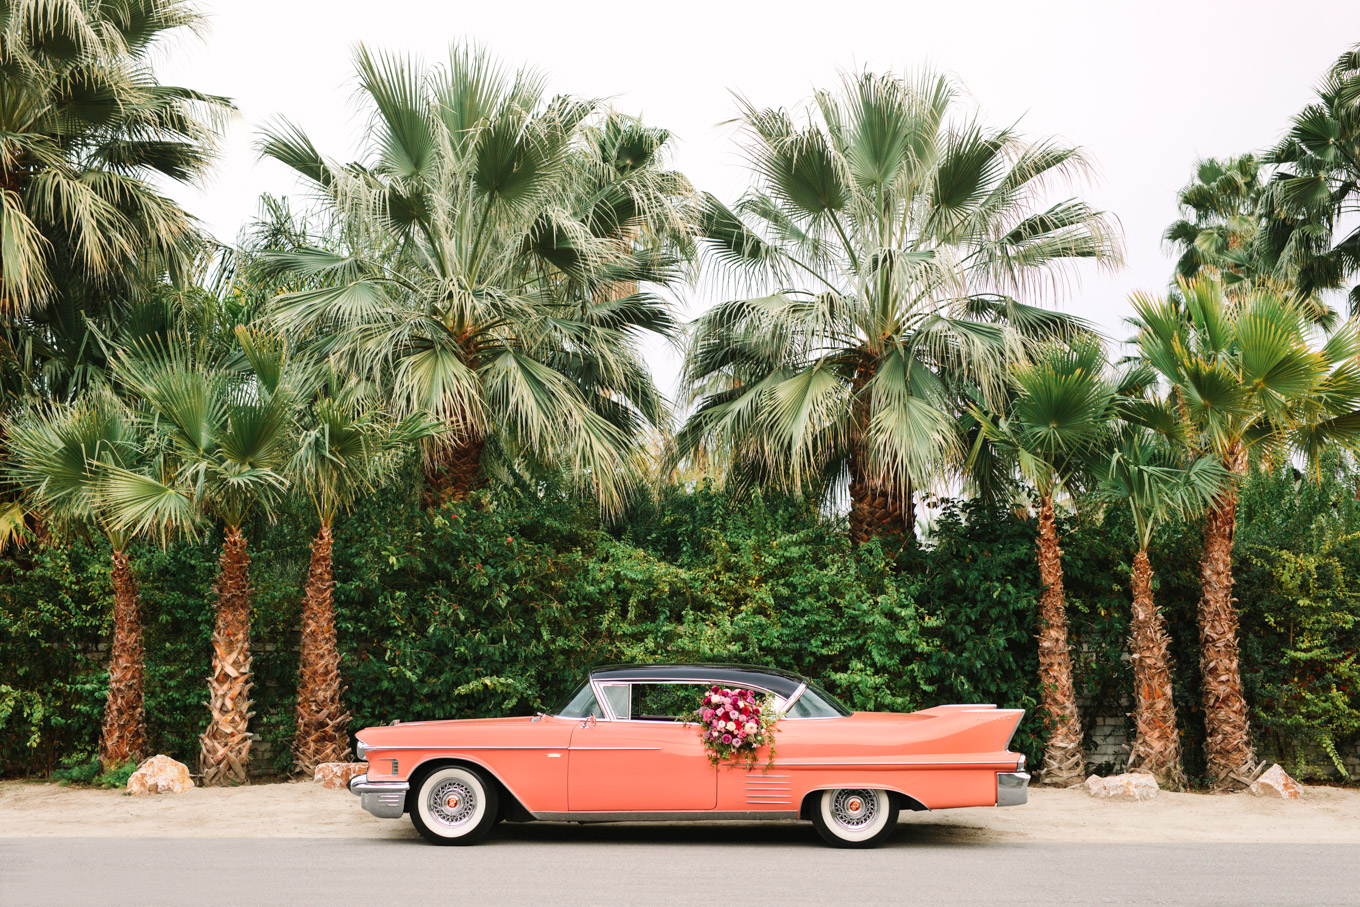 Casa de Monte Vista exterior. Modern vintage-inspired Palm Springs engagement session with a 1960s pink Cadillac, retro clothing, and flowers by Shindig Chic. | Colorful and elevated wedding inspiration for fun-loving couples in Southern California | #engagementsession #PalmSpringsengagement #vintageweddingdress #floralcar #pinkcar   Source: Mary Costa Photography | Los Angeles